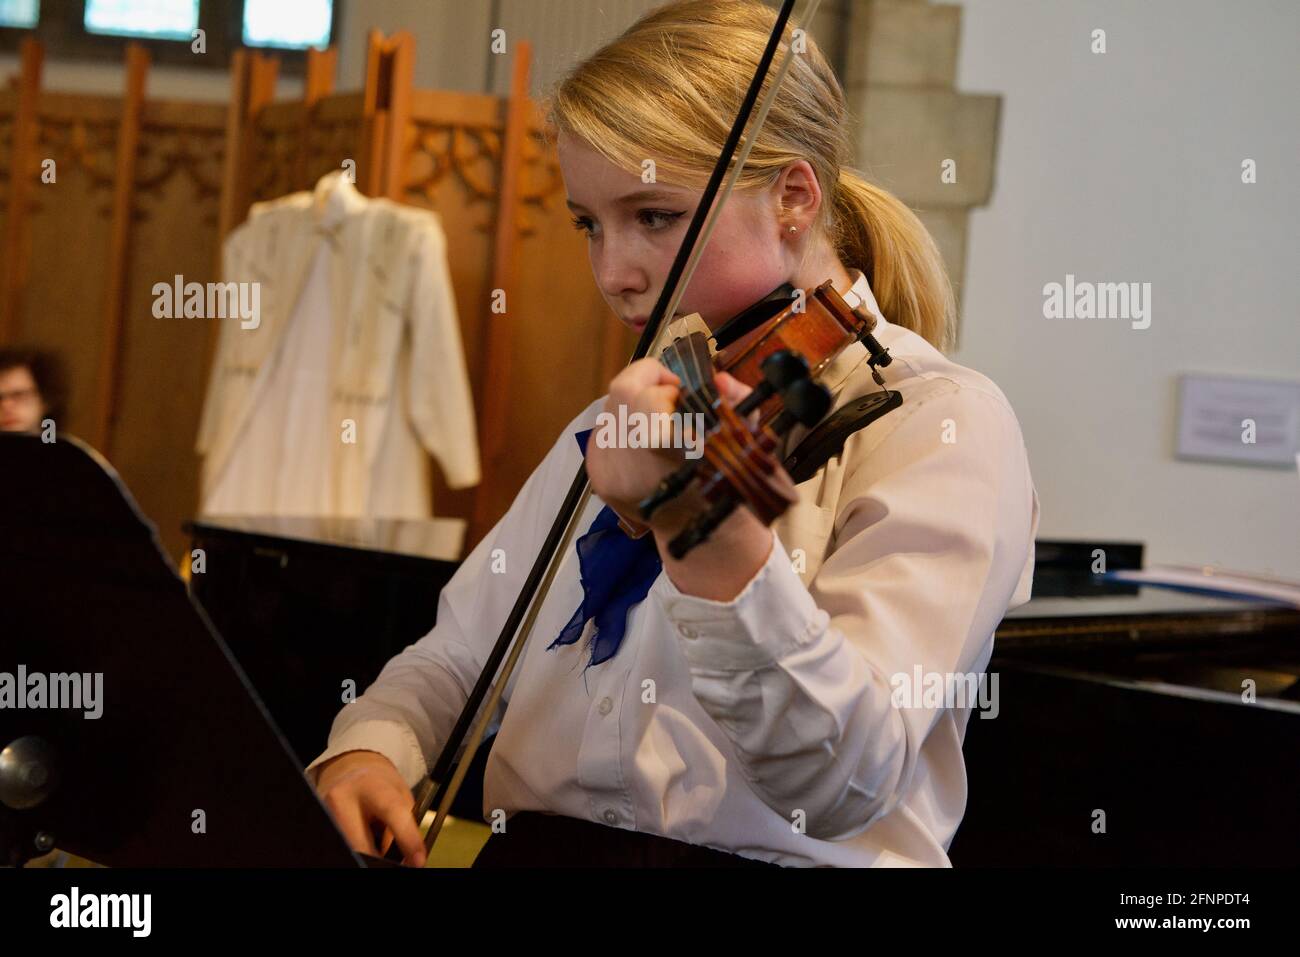 Young Violin player Stock Photo